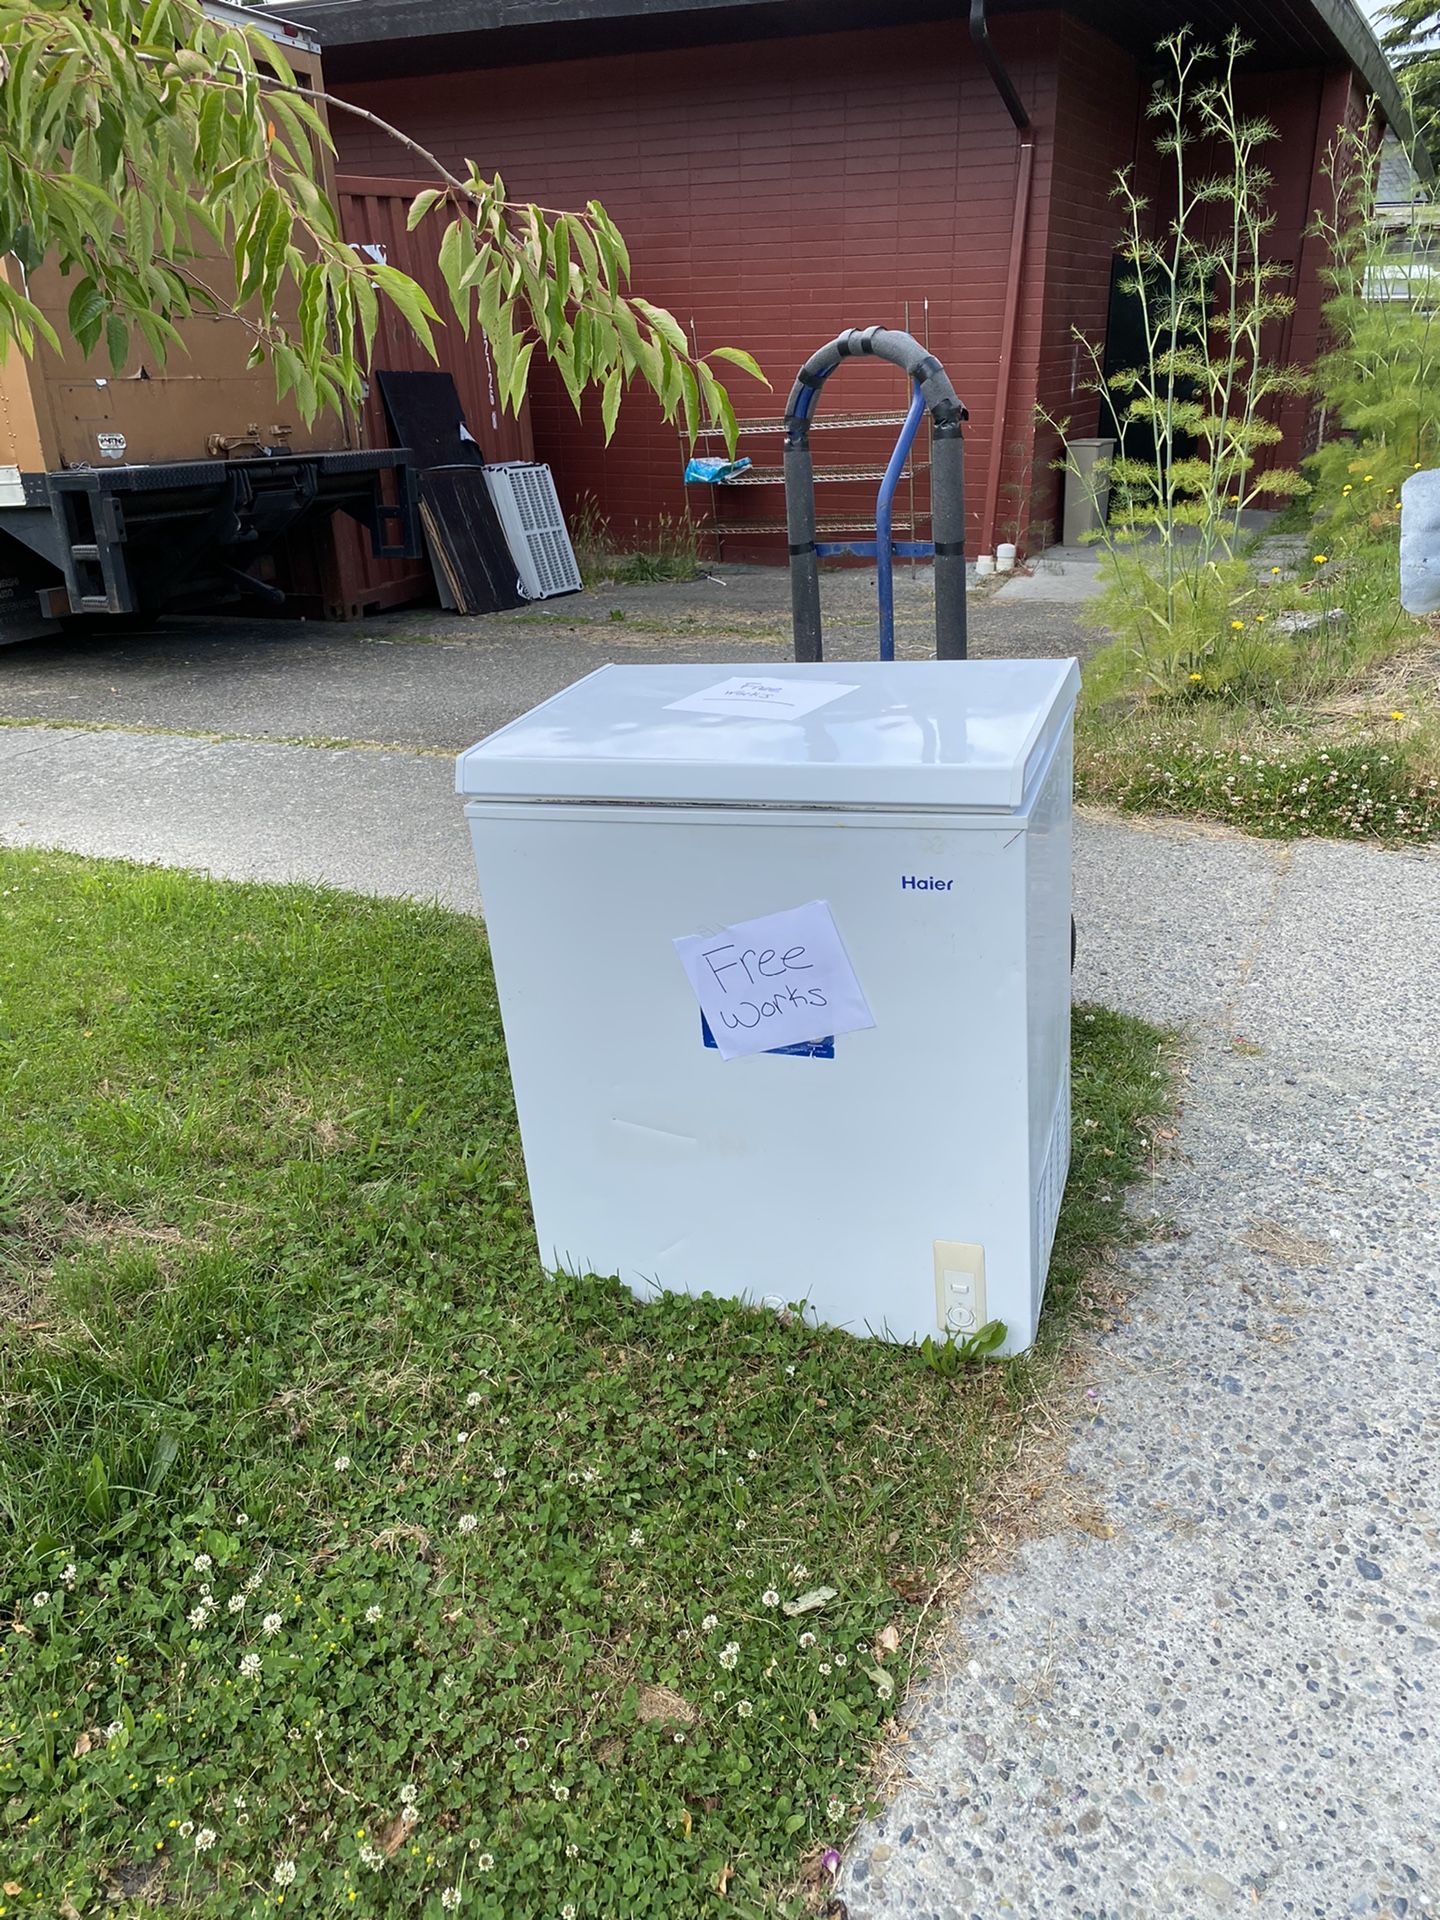 Free chest freezer. Magnolia. West Emerson between 34th ave W and 33rd Ave W. End of alley.